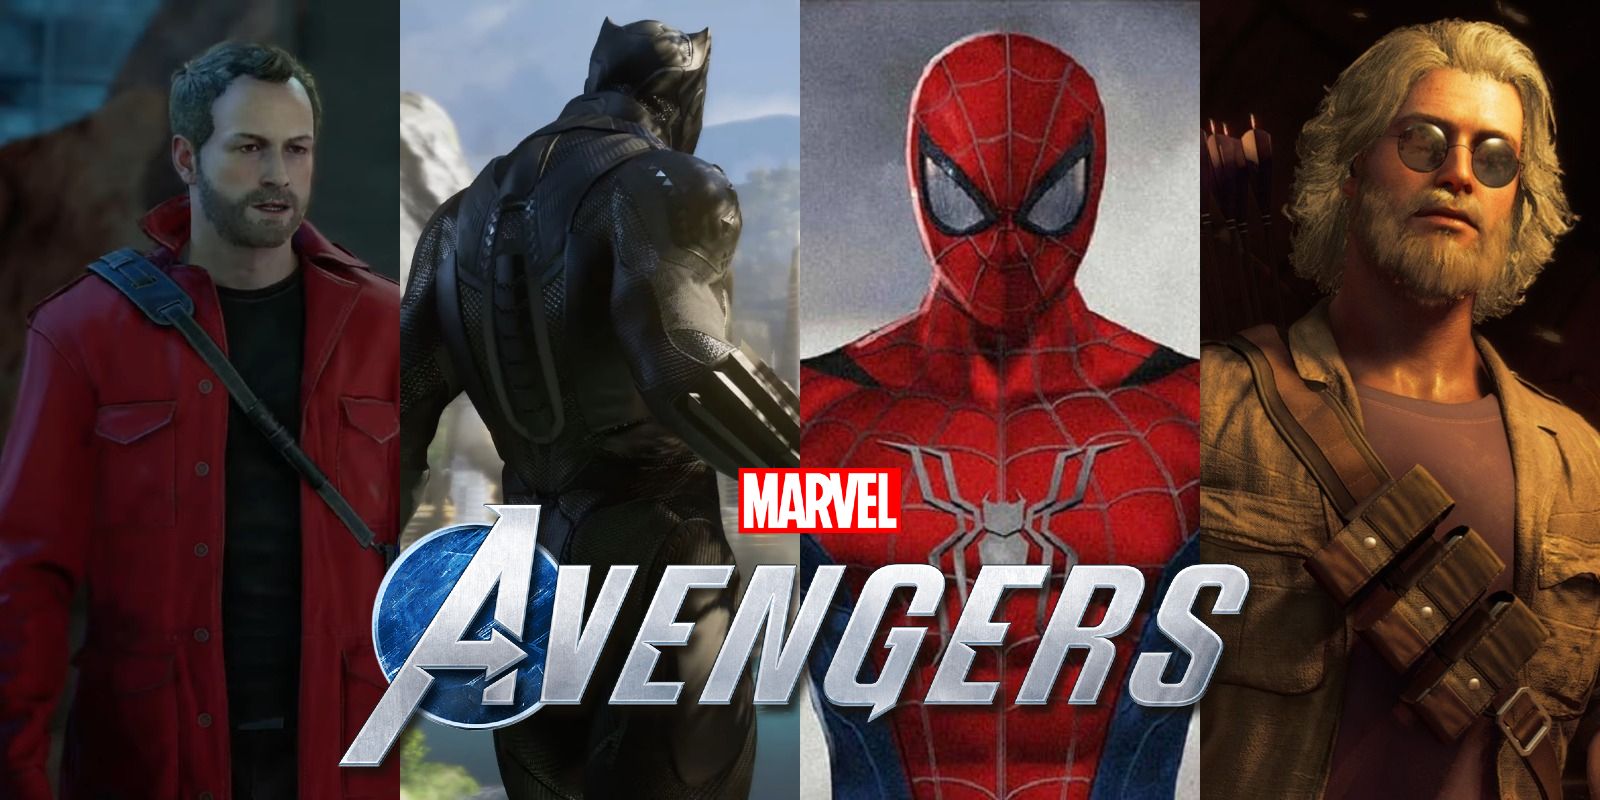 Black Panther, Spider-Man and other characters in Marvel's Avengers